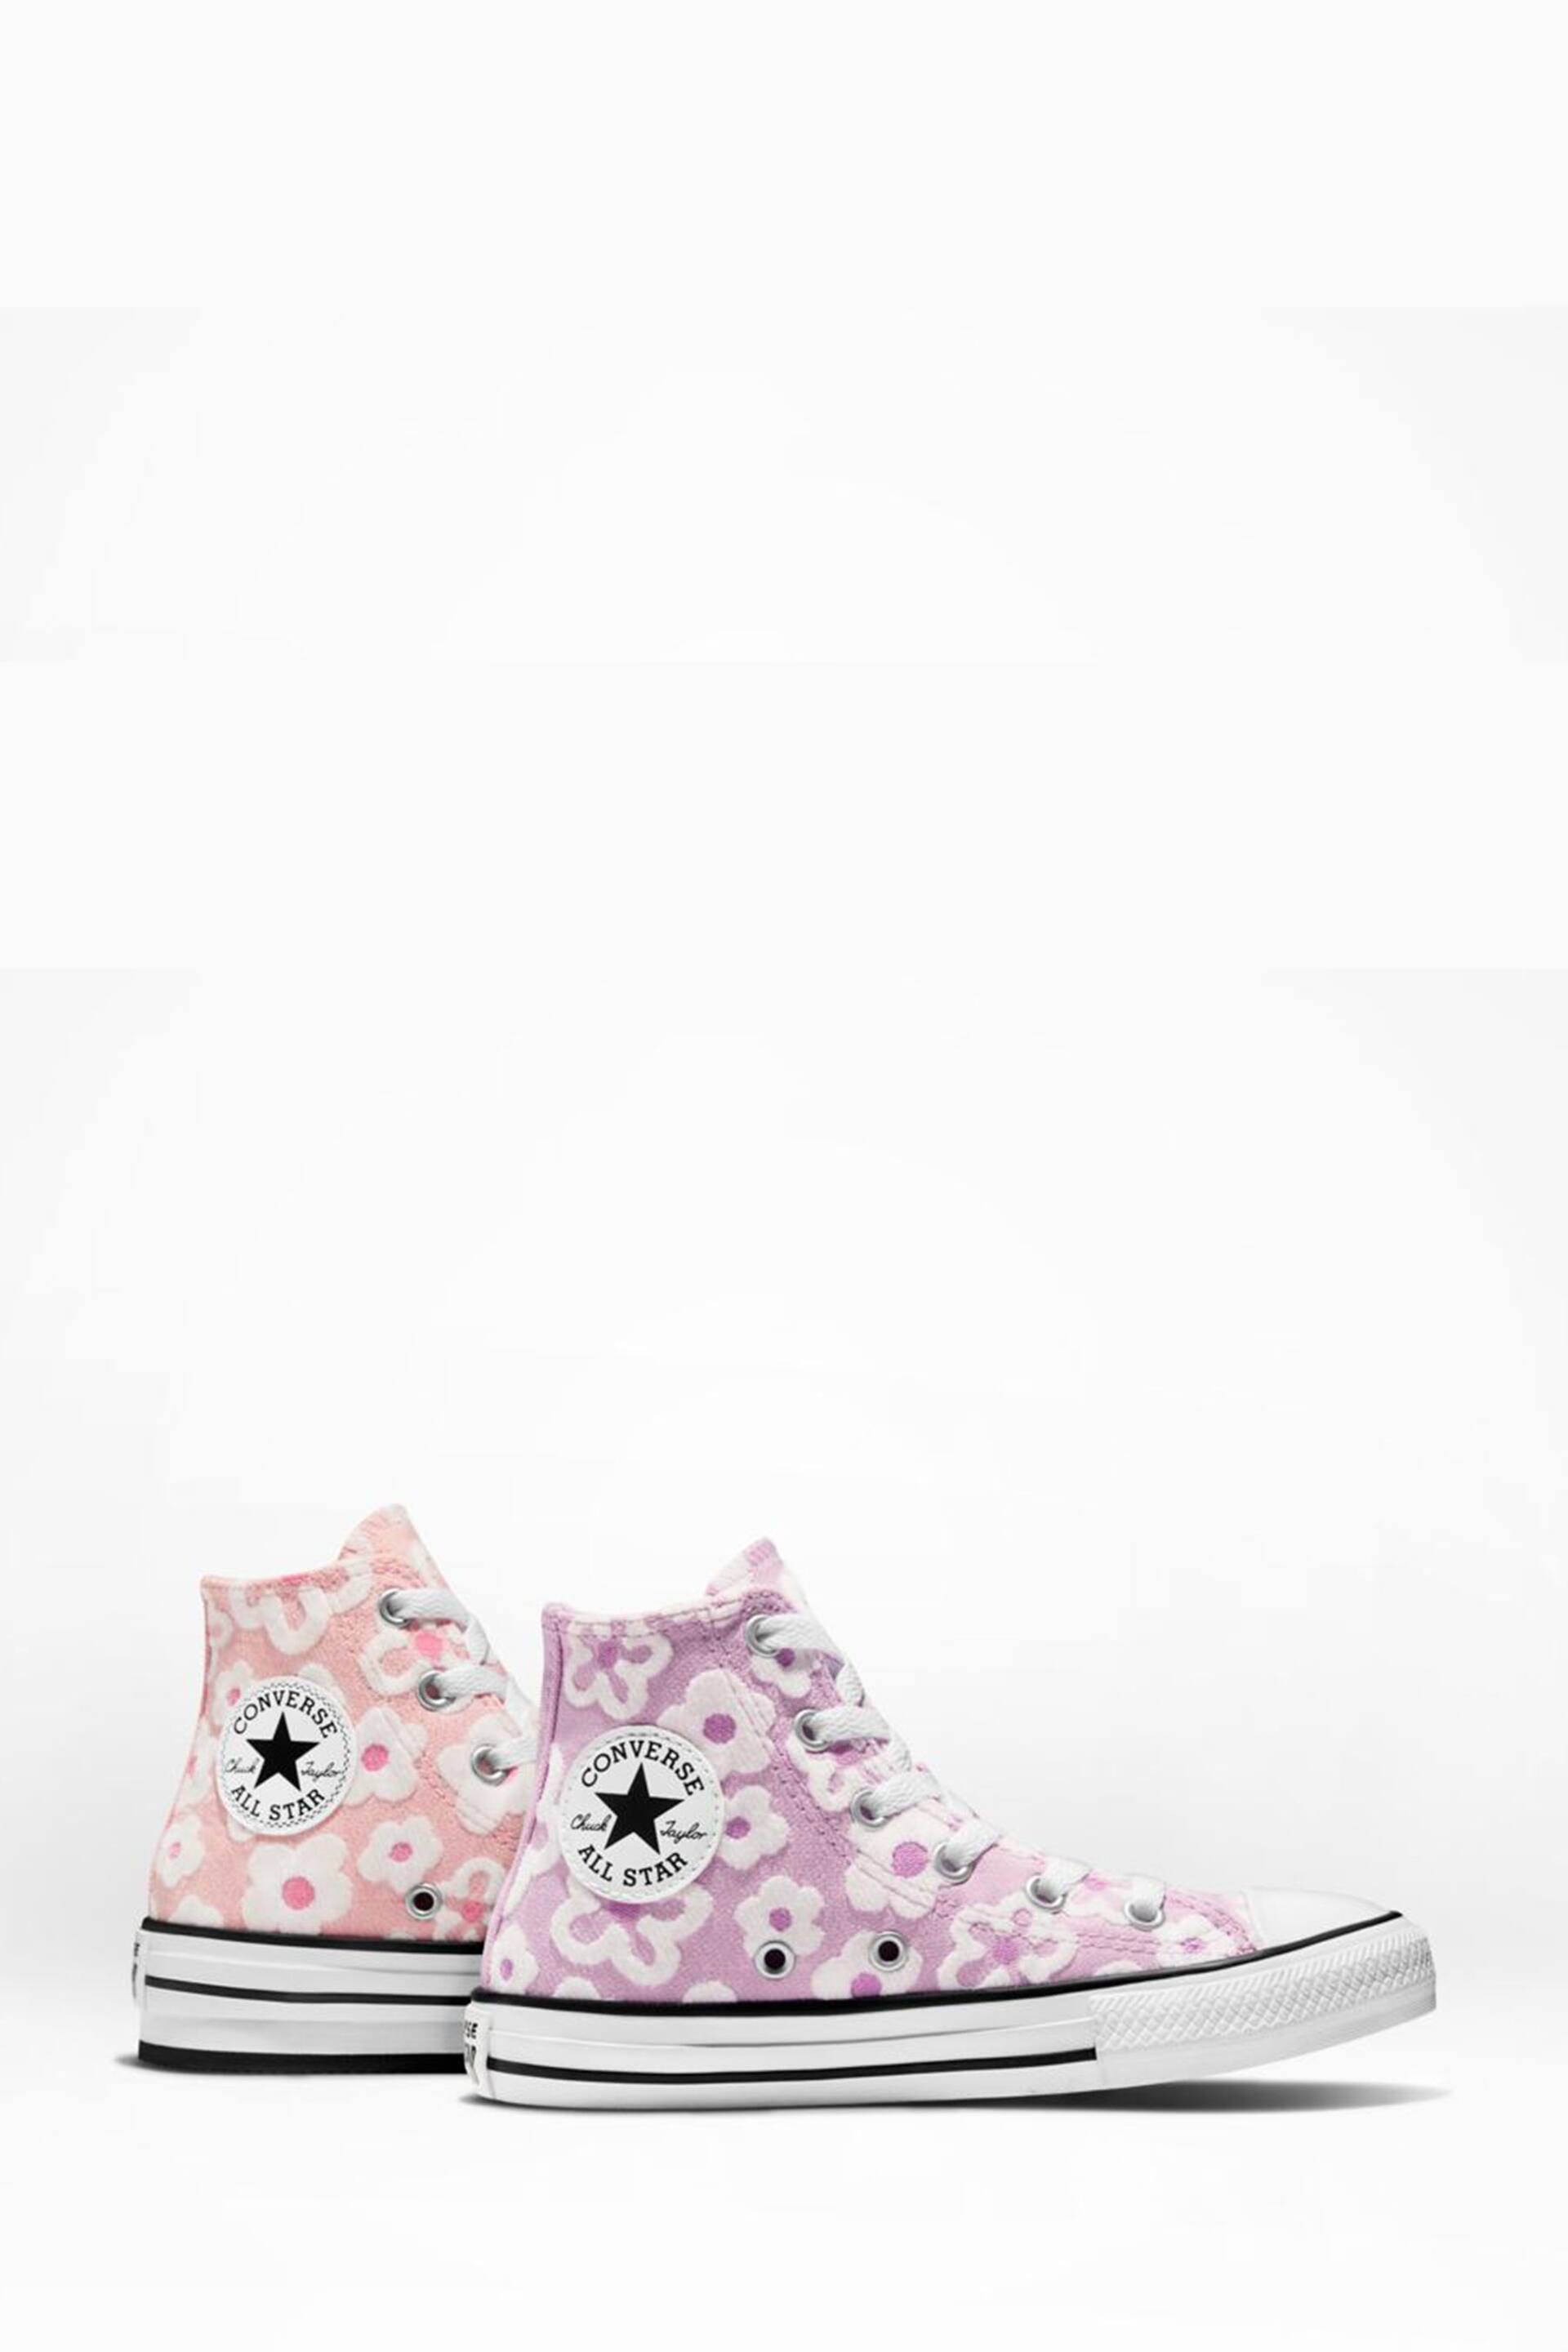 Converse Pink Floral Textured Eva Lift Youth Trainers - Image 3 of 13